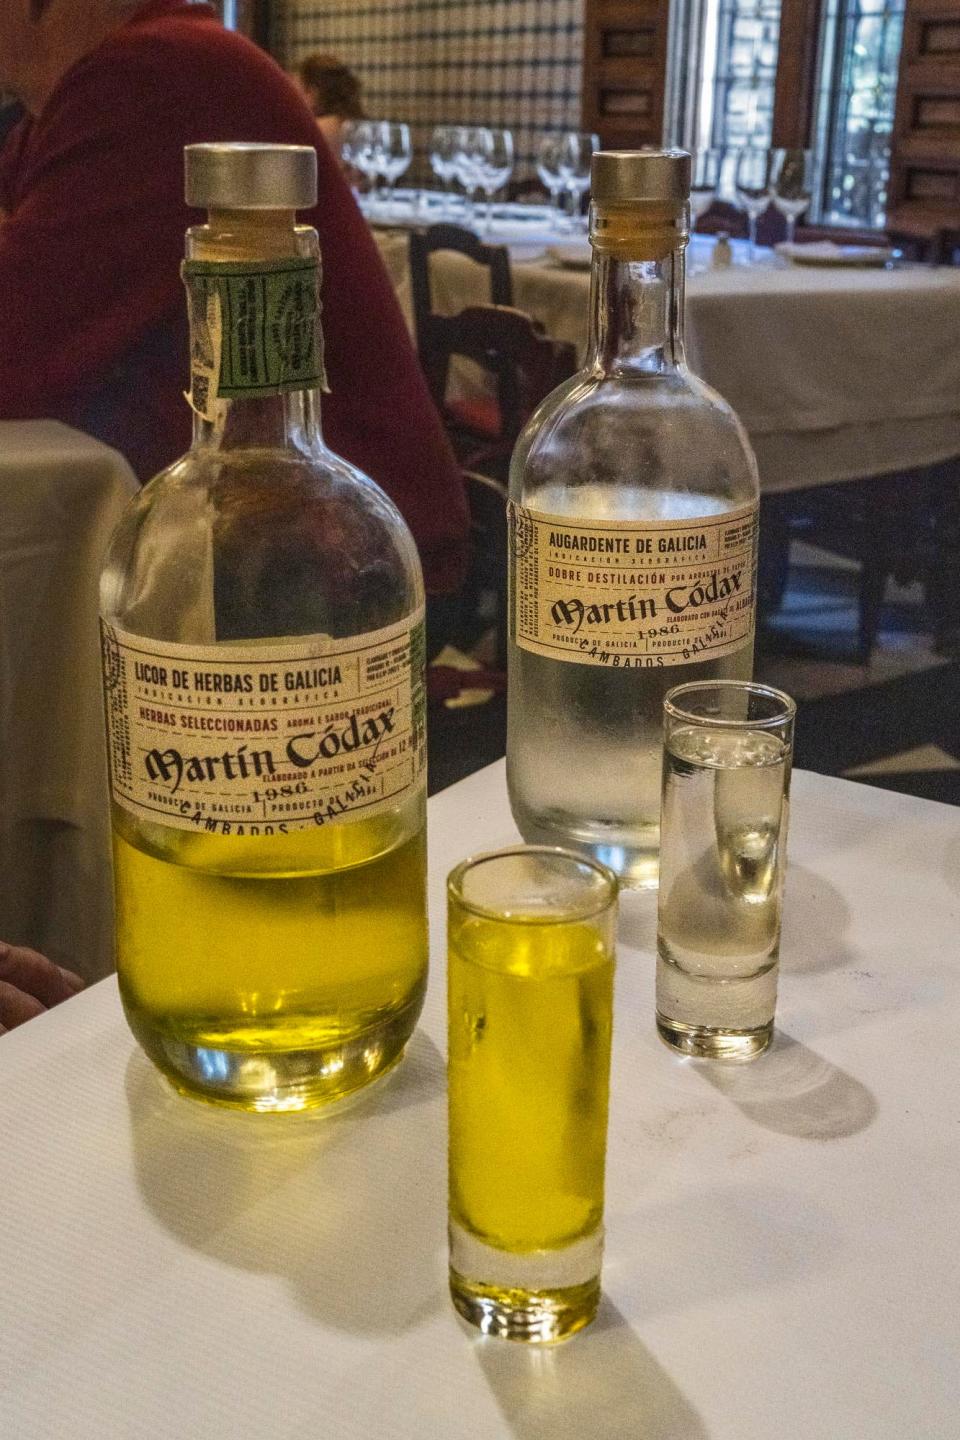 Two bottles and two small glasses of alcohol on a table.